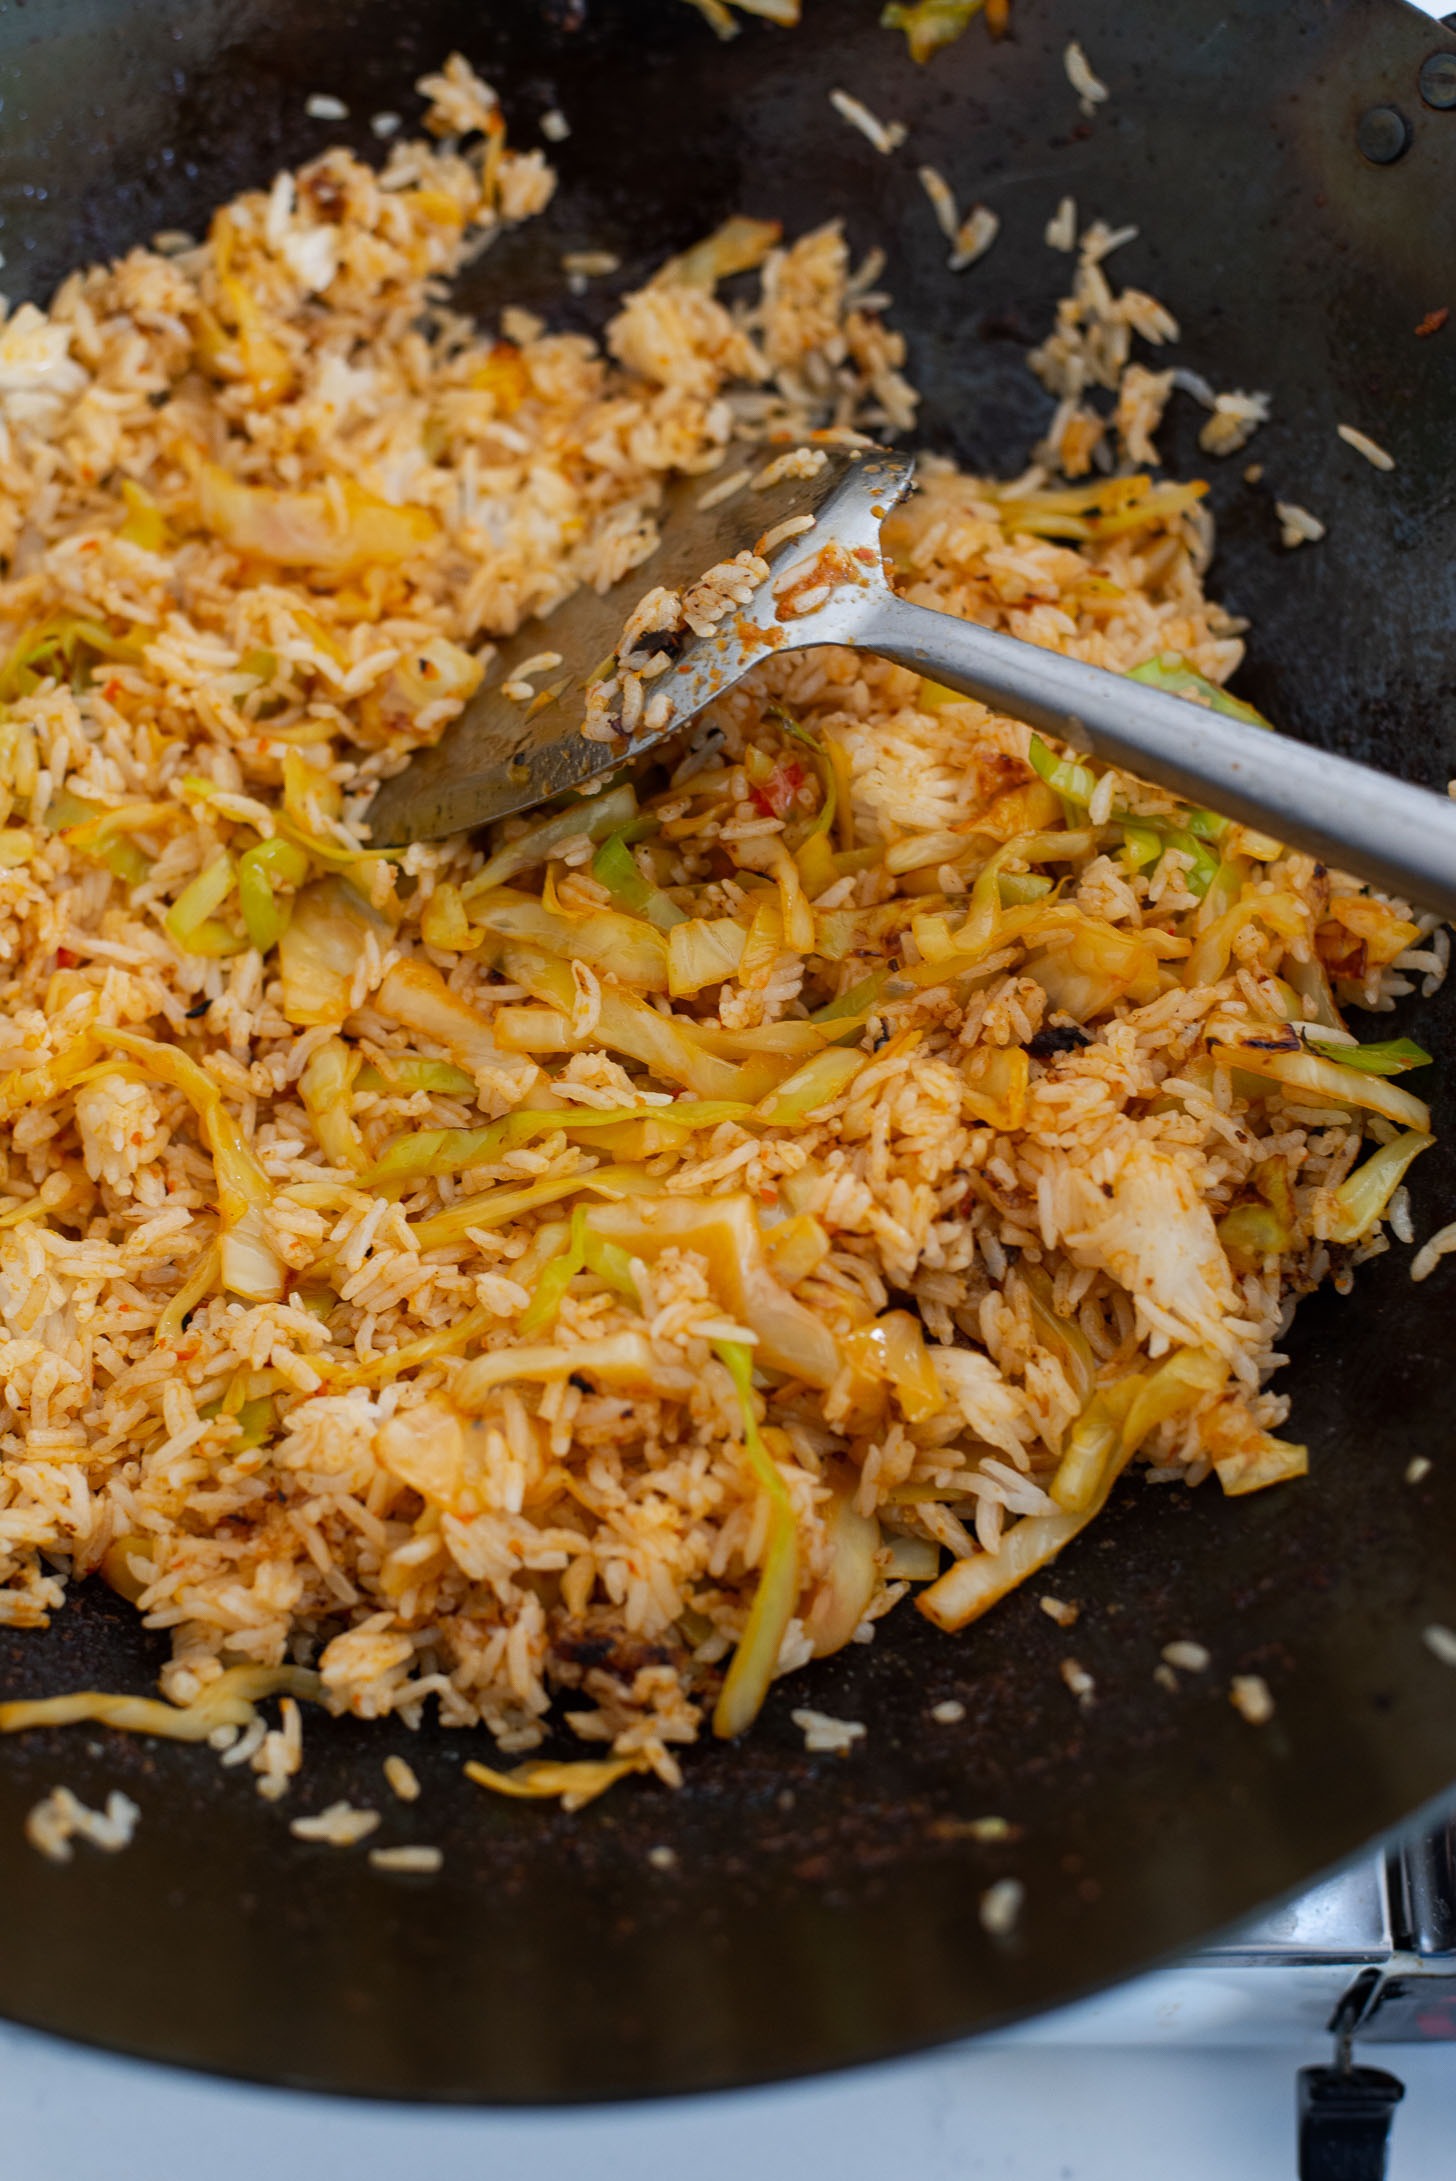 Rice is added to vegetable mixture in a wok to make Nasi Goreng.